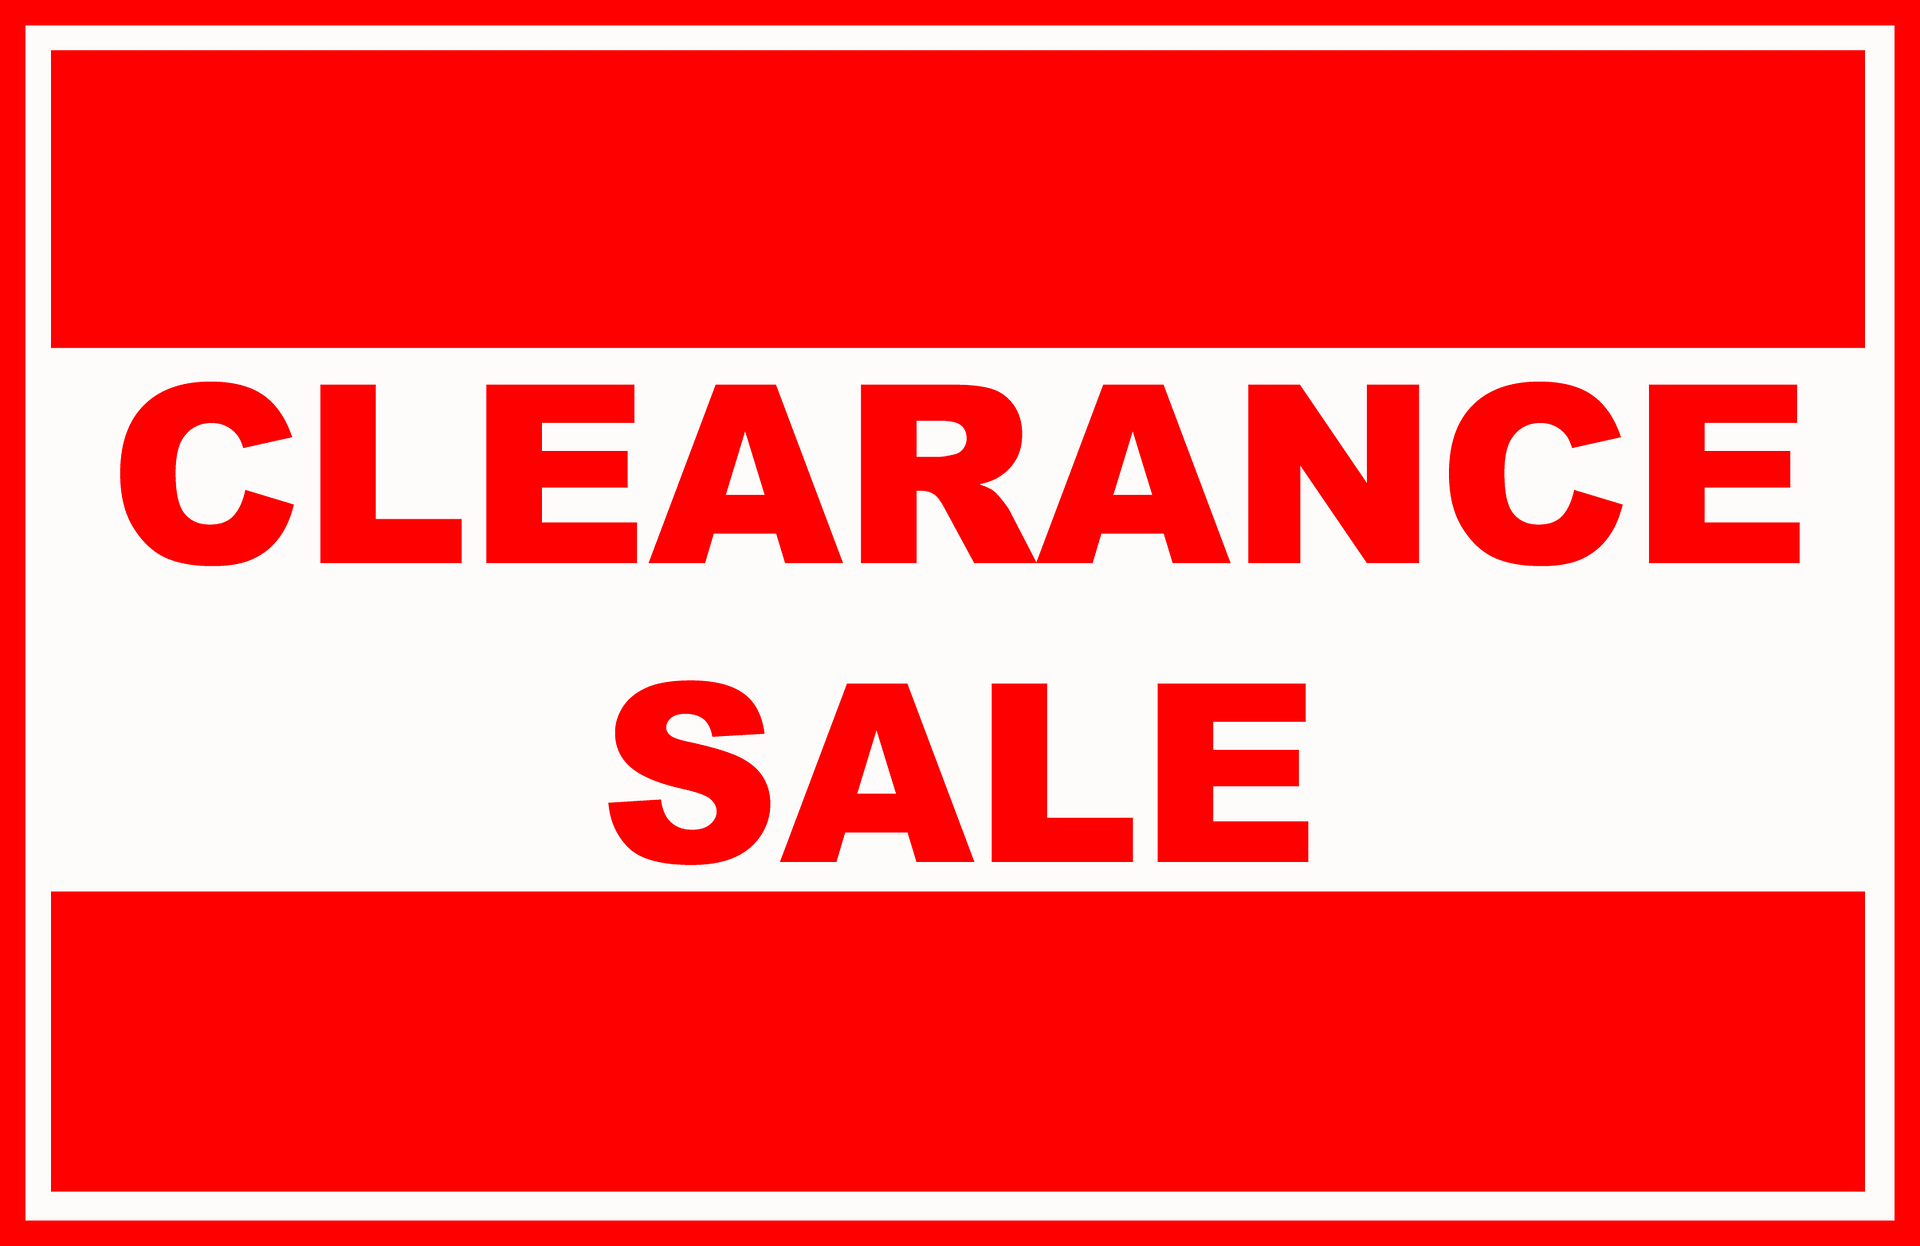 Overstock Clearance 